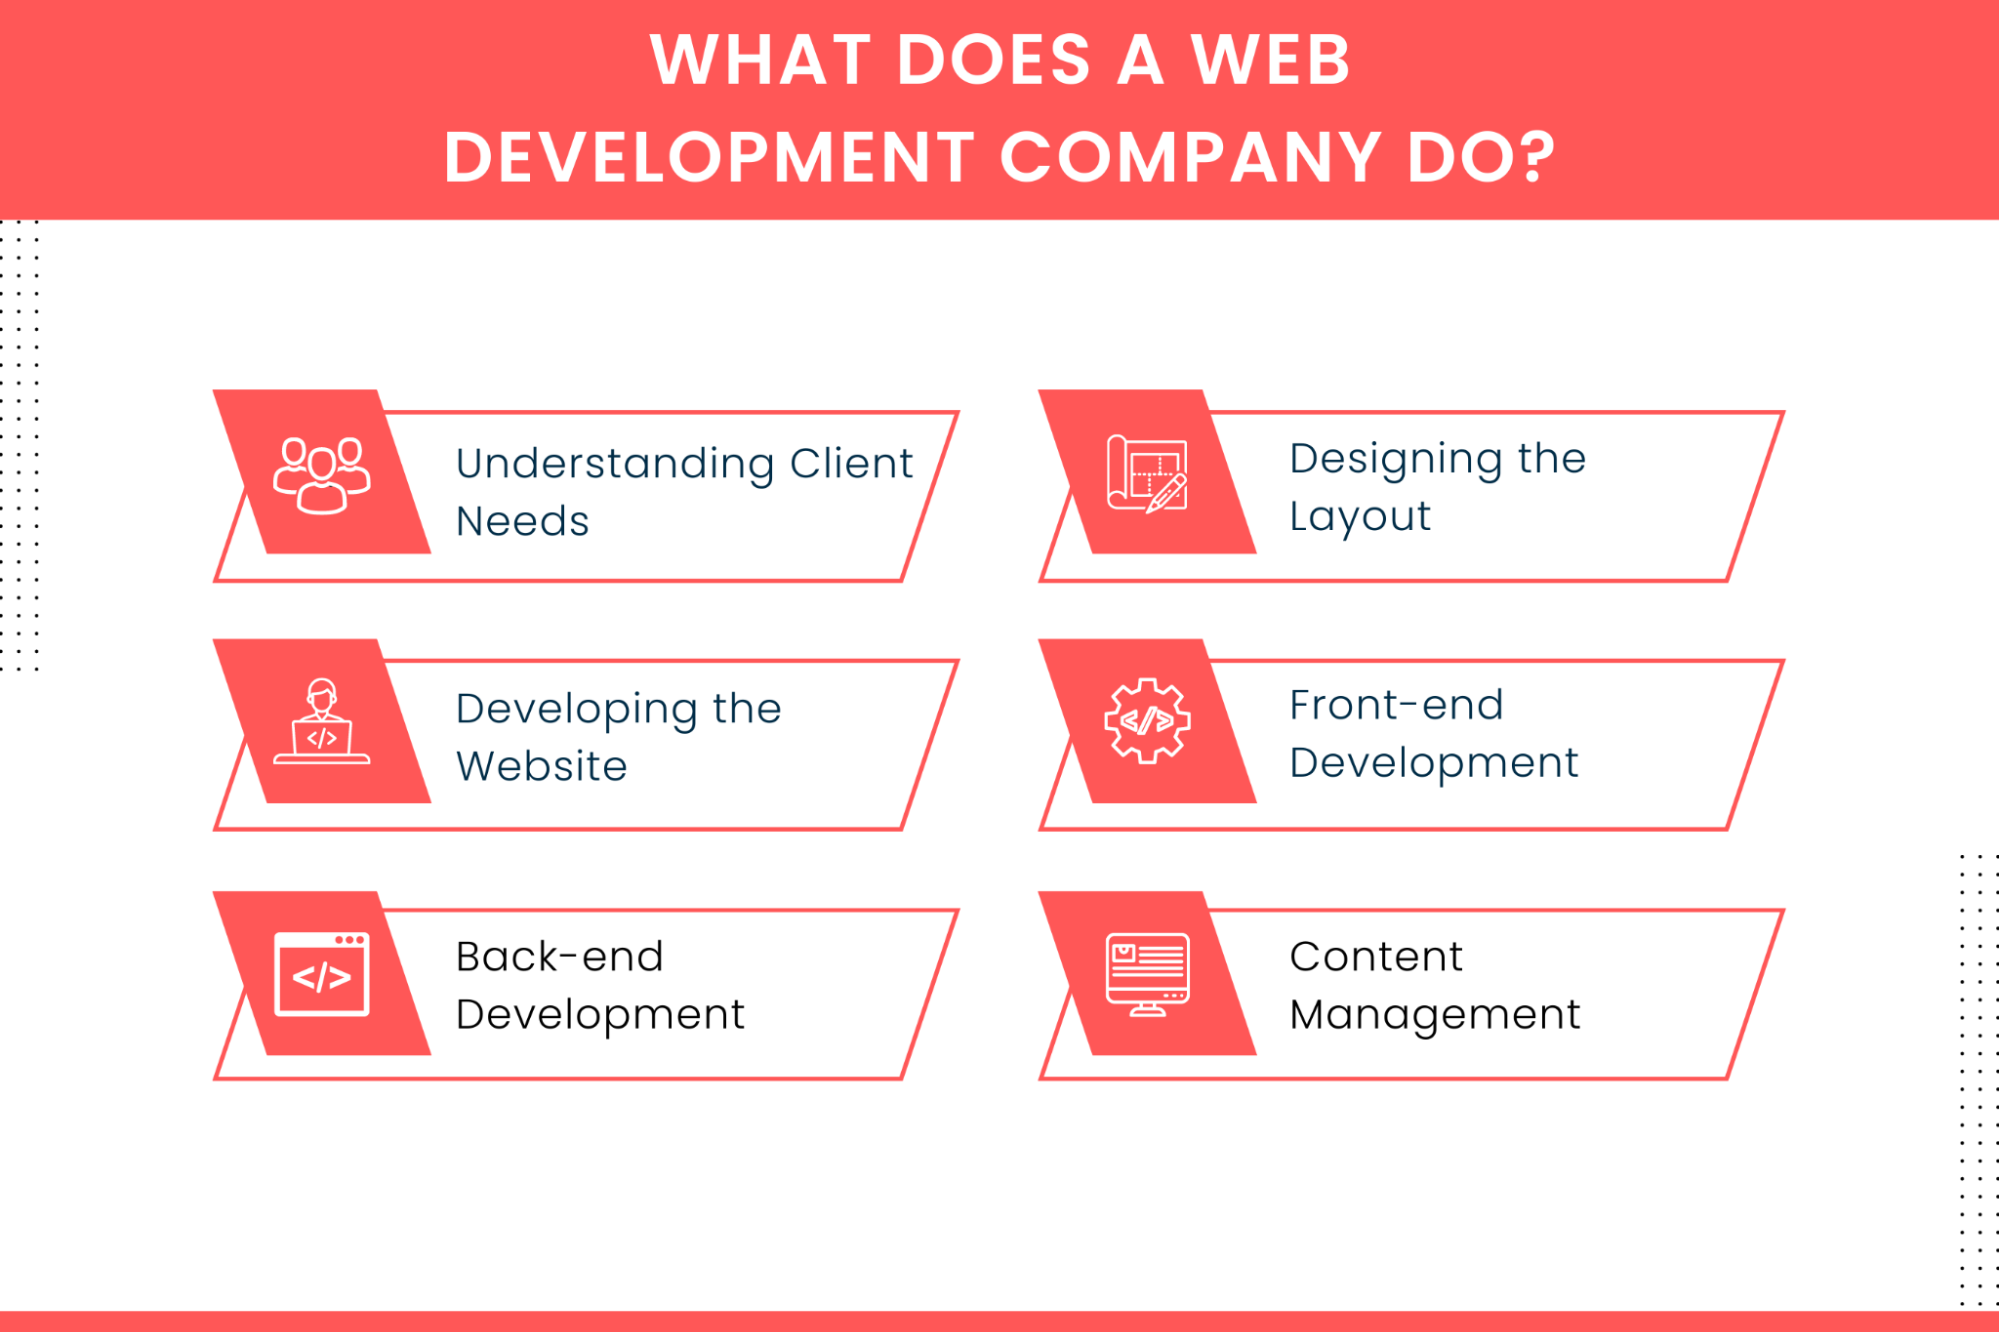 What Does a Web Development Company Do